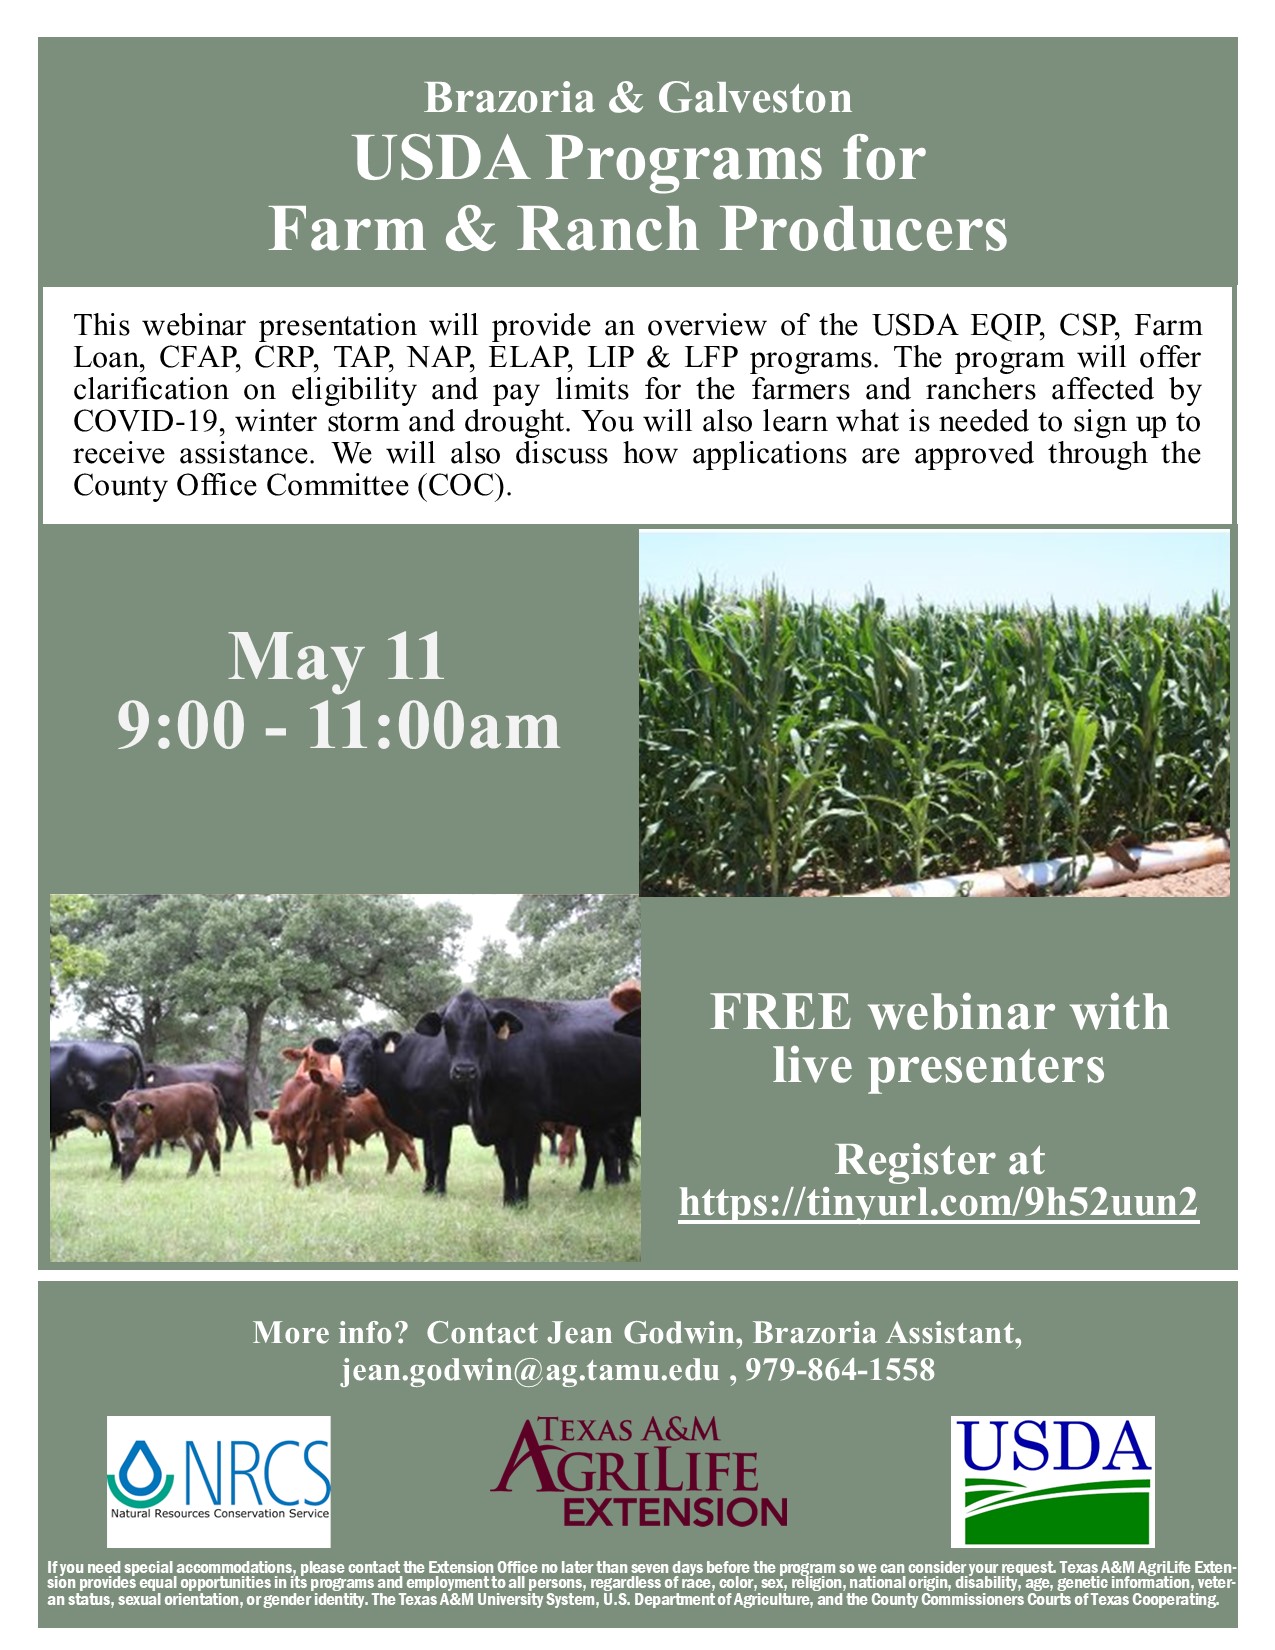 USDA Assistance Program for Farm and Ranch Producers Brazoria